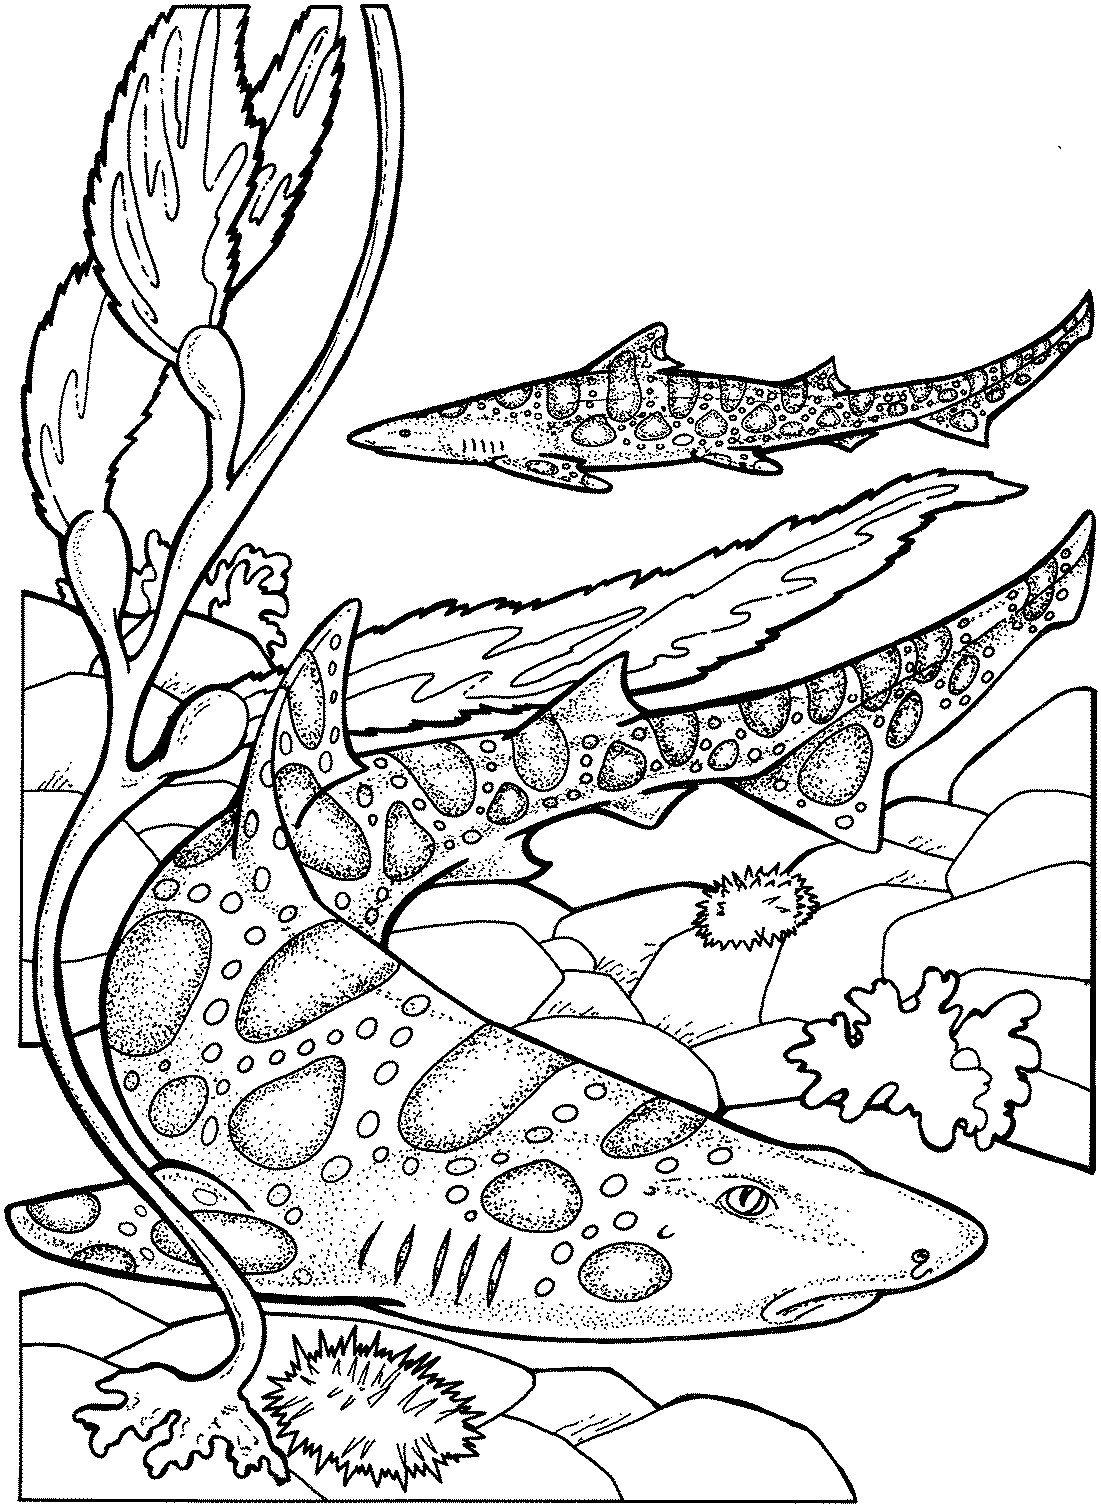 Hammerhead Shark Coloring Pages to